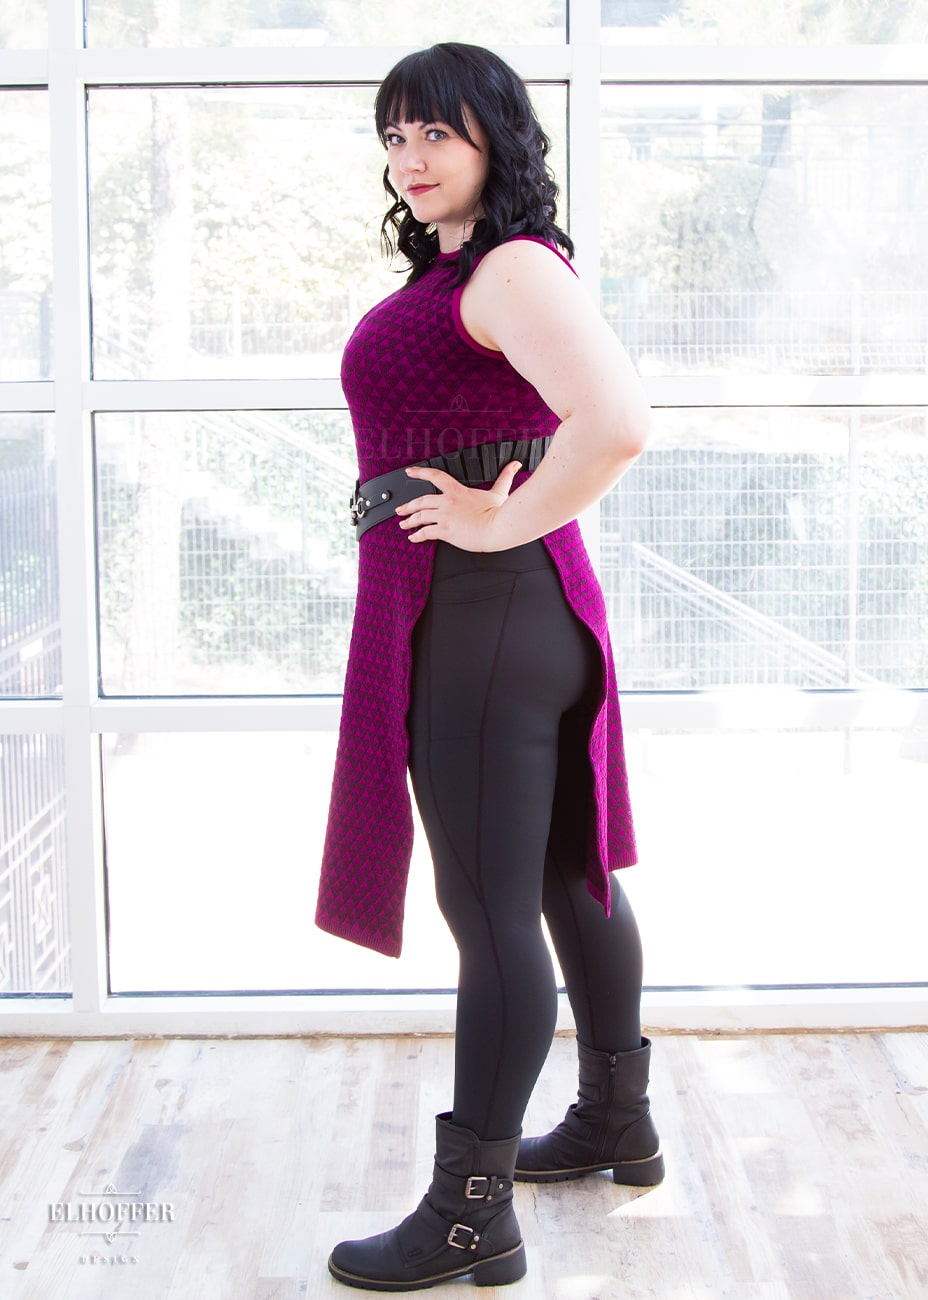 Bernadette, a fair skinned size large model with short black hair and bangs, is wearing a pullover cropped sleeveless knit top with front and back flaps in a magenta triangle knit.